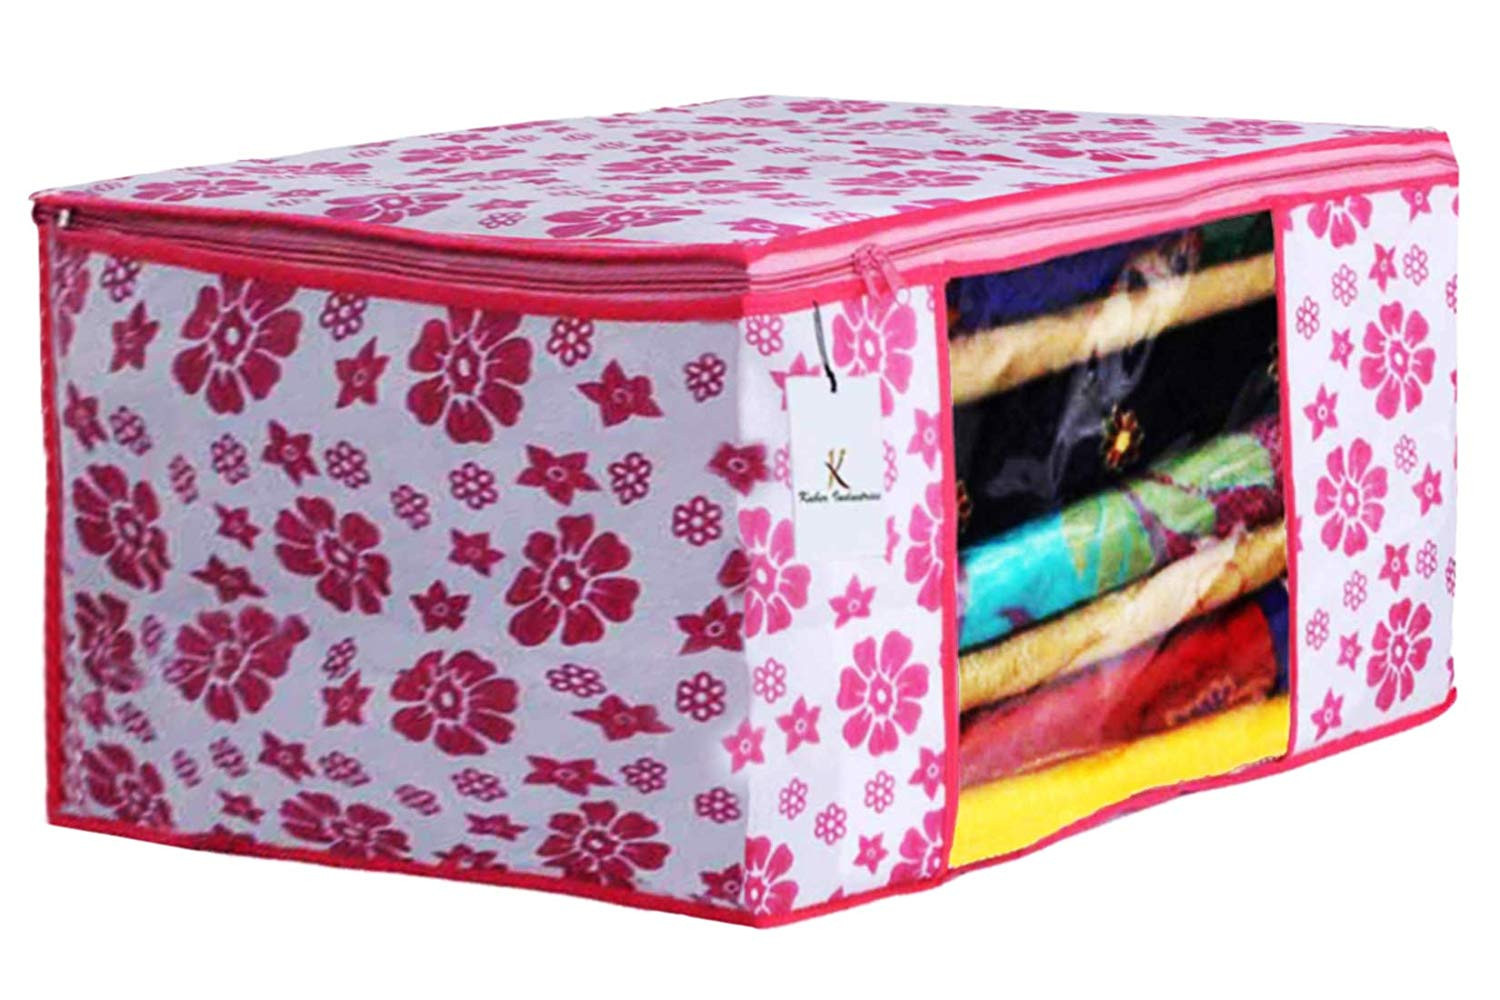 Kuber Industries Flower & Leaf Printed Non Woven Fabric Saree Cover Set with Transparent Window, Extra Large, Pink & Blue & Ivory Red & Golden Brown & Red -CTKTC40849